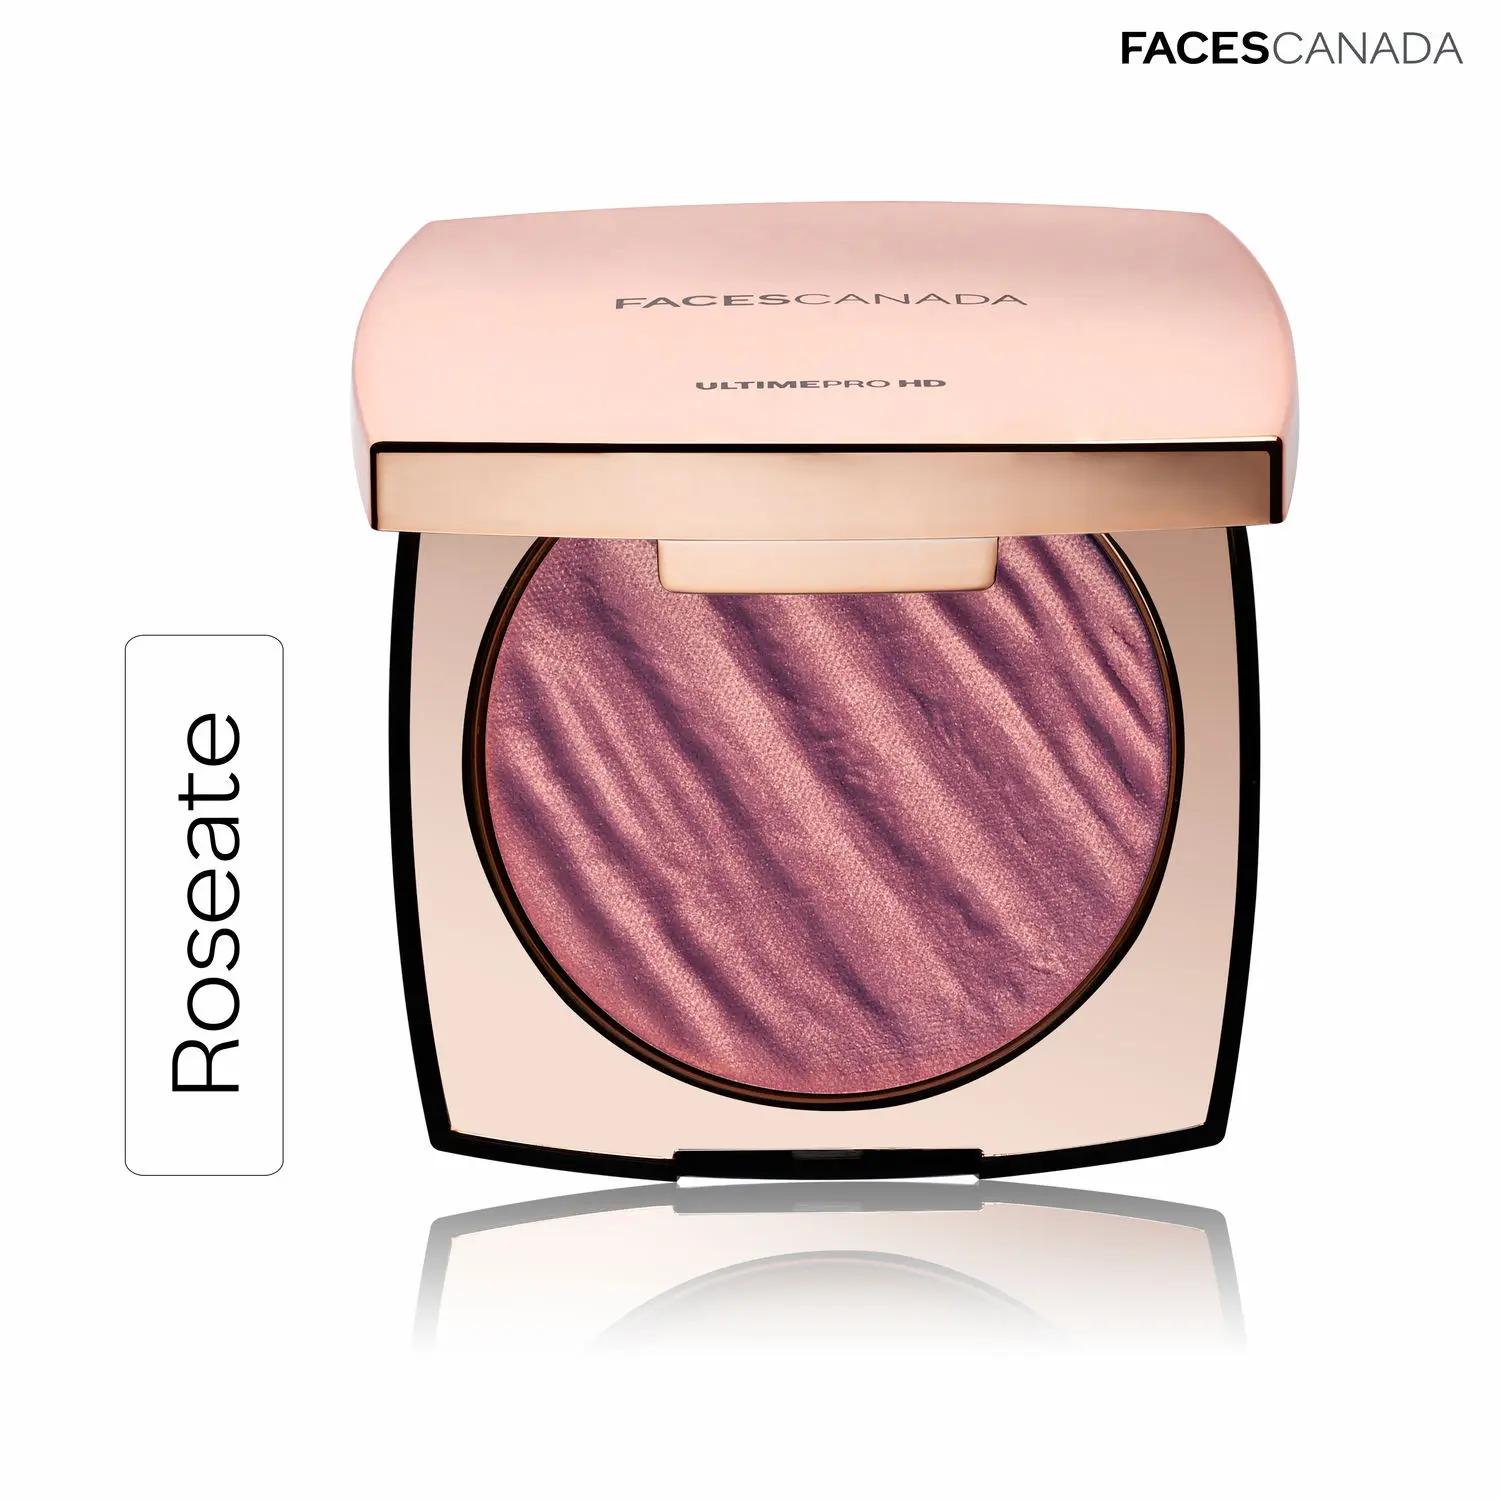 Faces Canada Ultime Pro HD Light Camera Blush Roseate 02 (6 g)